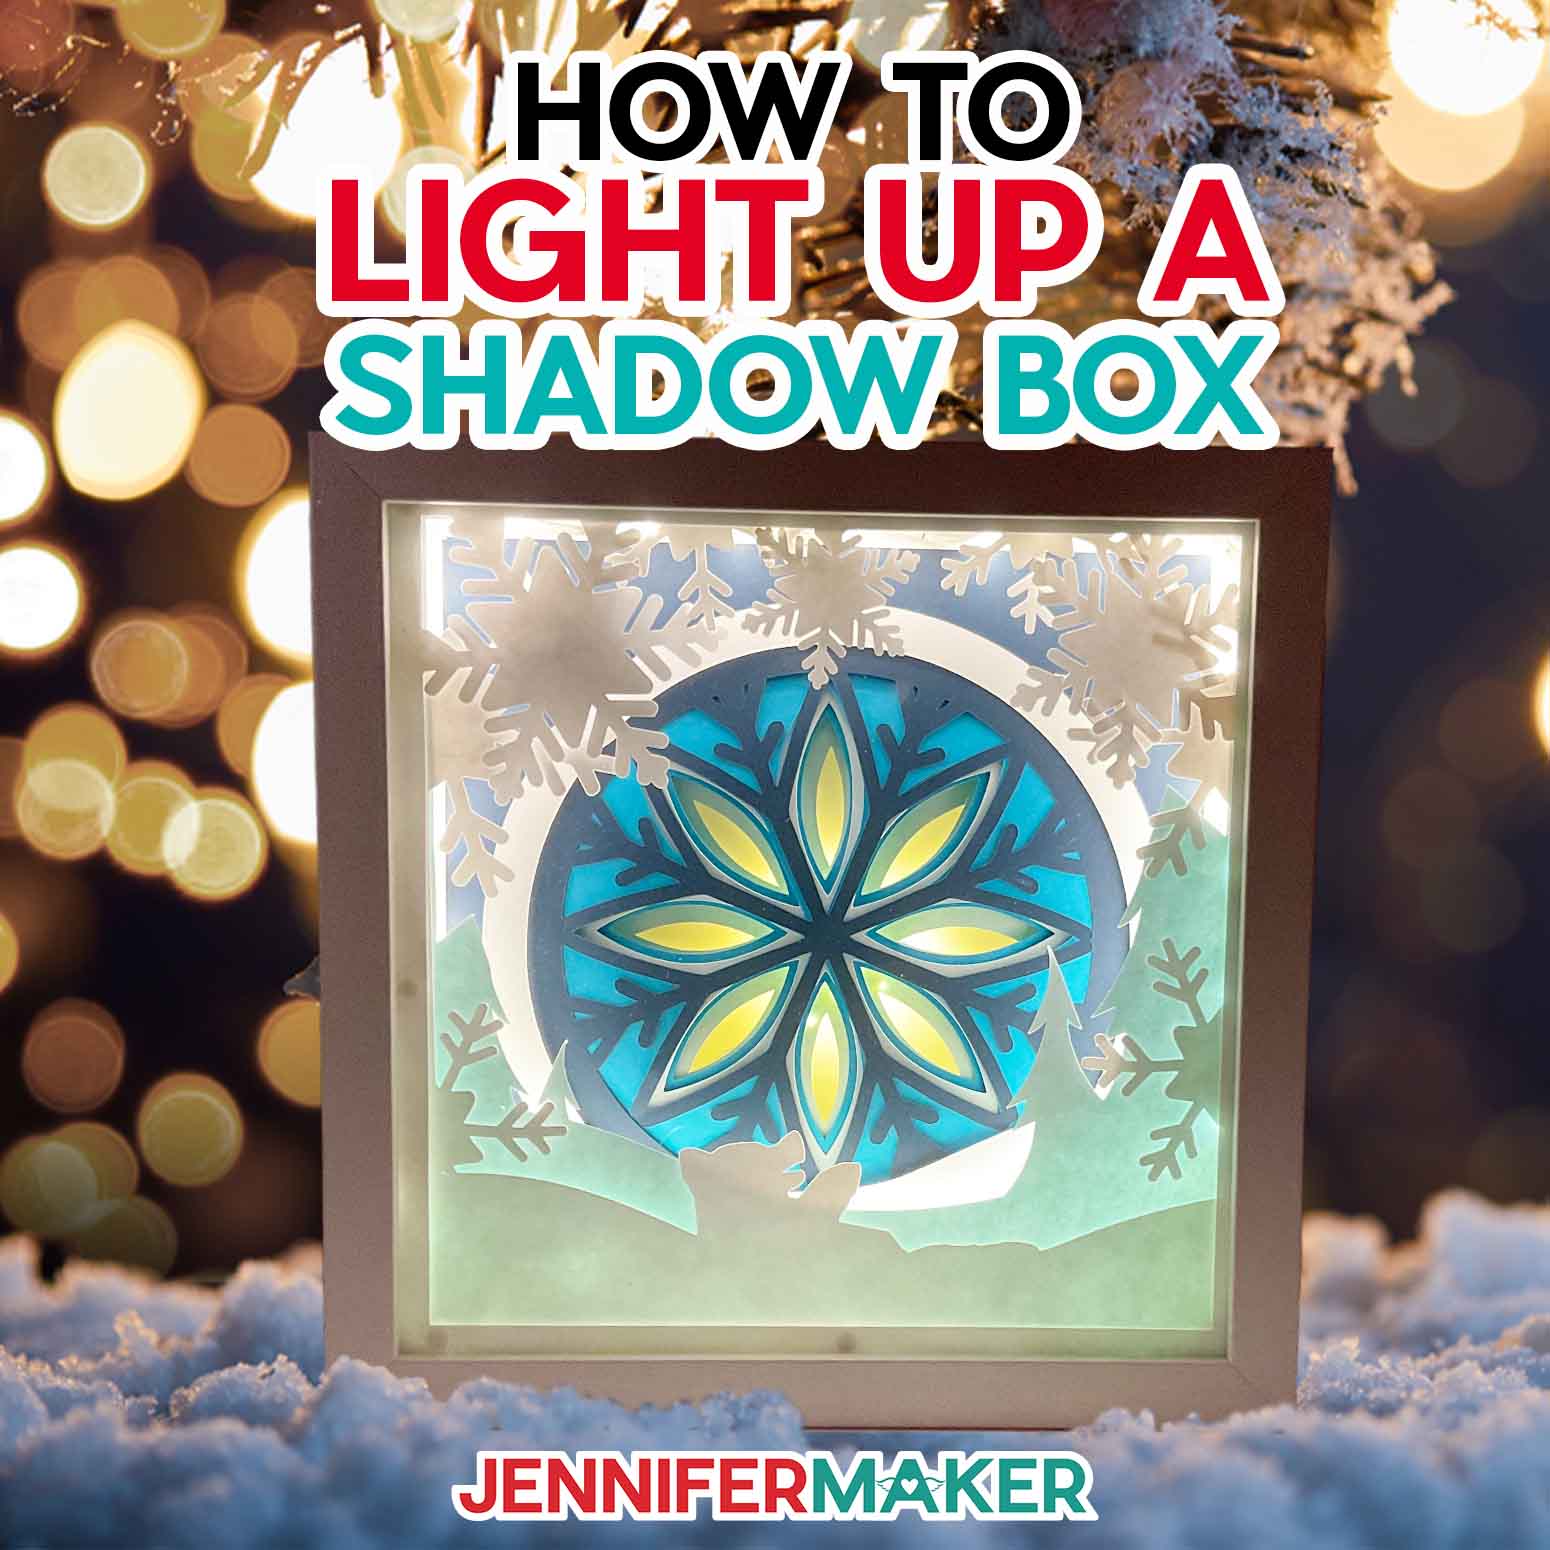 Lighted Shadow Box Techniques for Decor and Depth! - Jennifer Maker